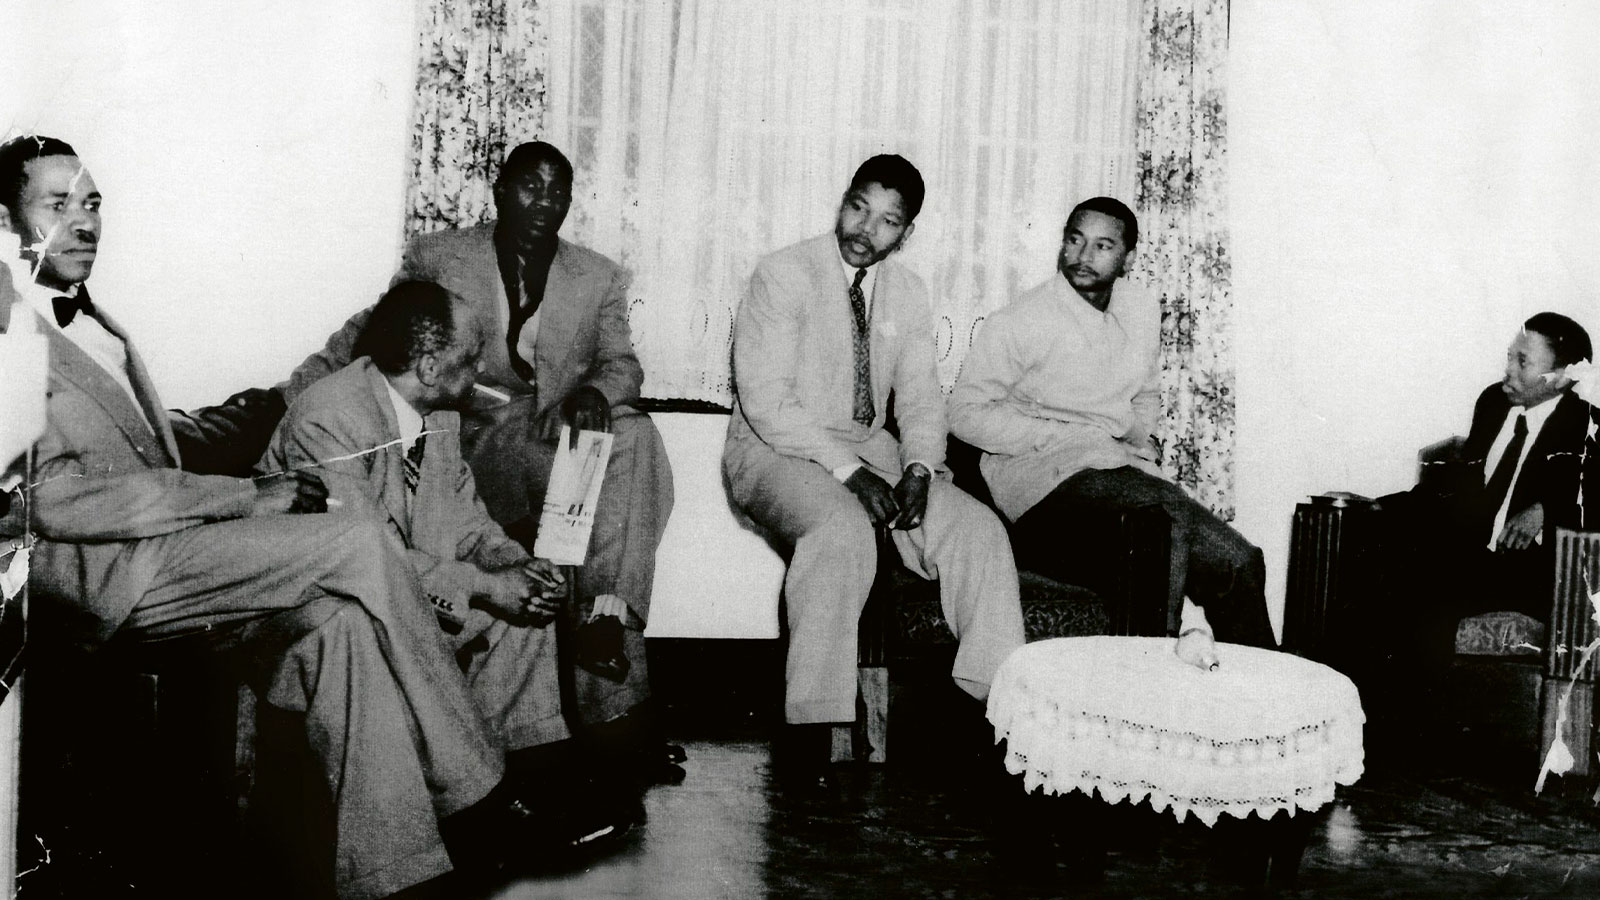 Mandela, third from right, with friends in Soweto in the 1950s. "My father always talked about the fact that the intention of the ANC (African National Congress political party) was always a peaceful transition, so that all South Africans could benefit equally," said Dr. Mandela. "However, when he and his colleagues saw that the response from the South African apartheid government was brutal force and murder, they then resorted to an armed struggle because they were at the end of their tether."